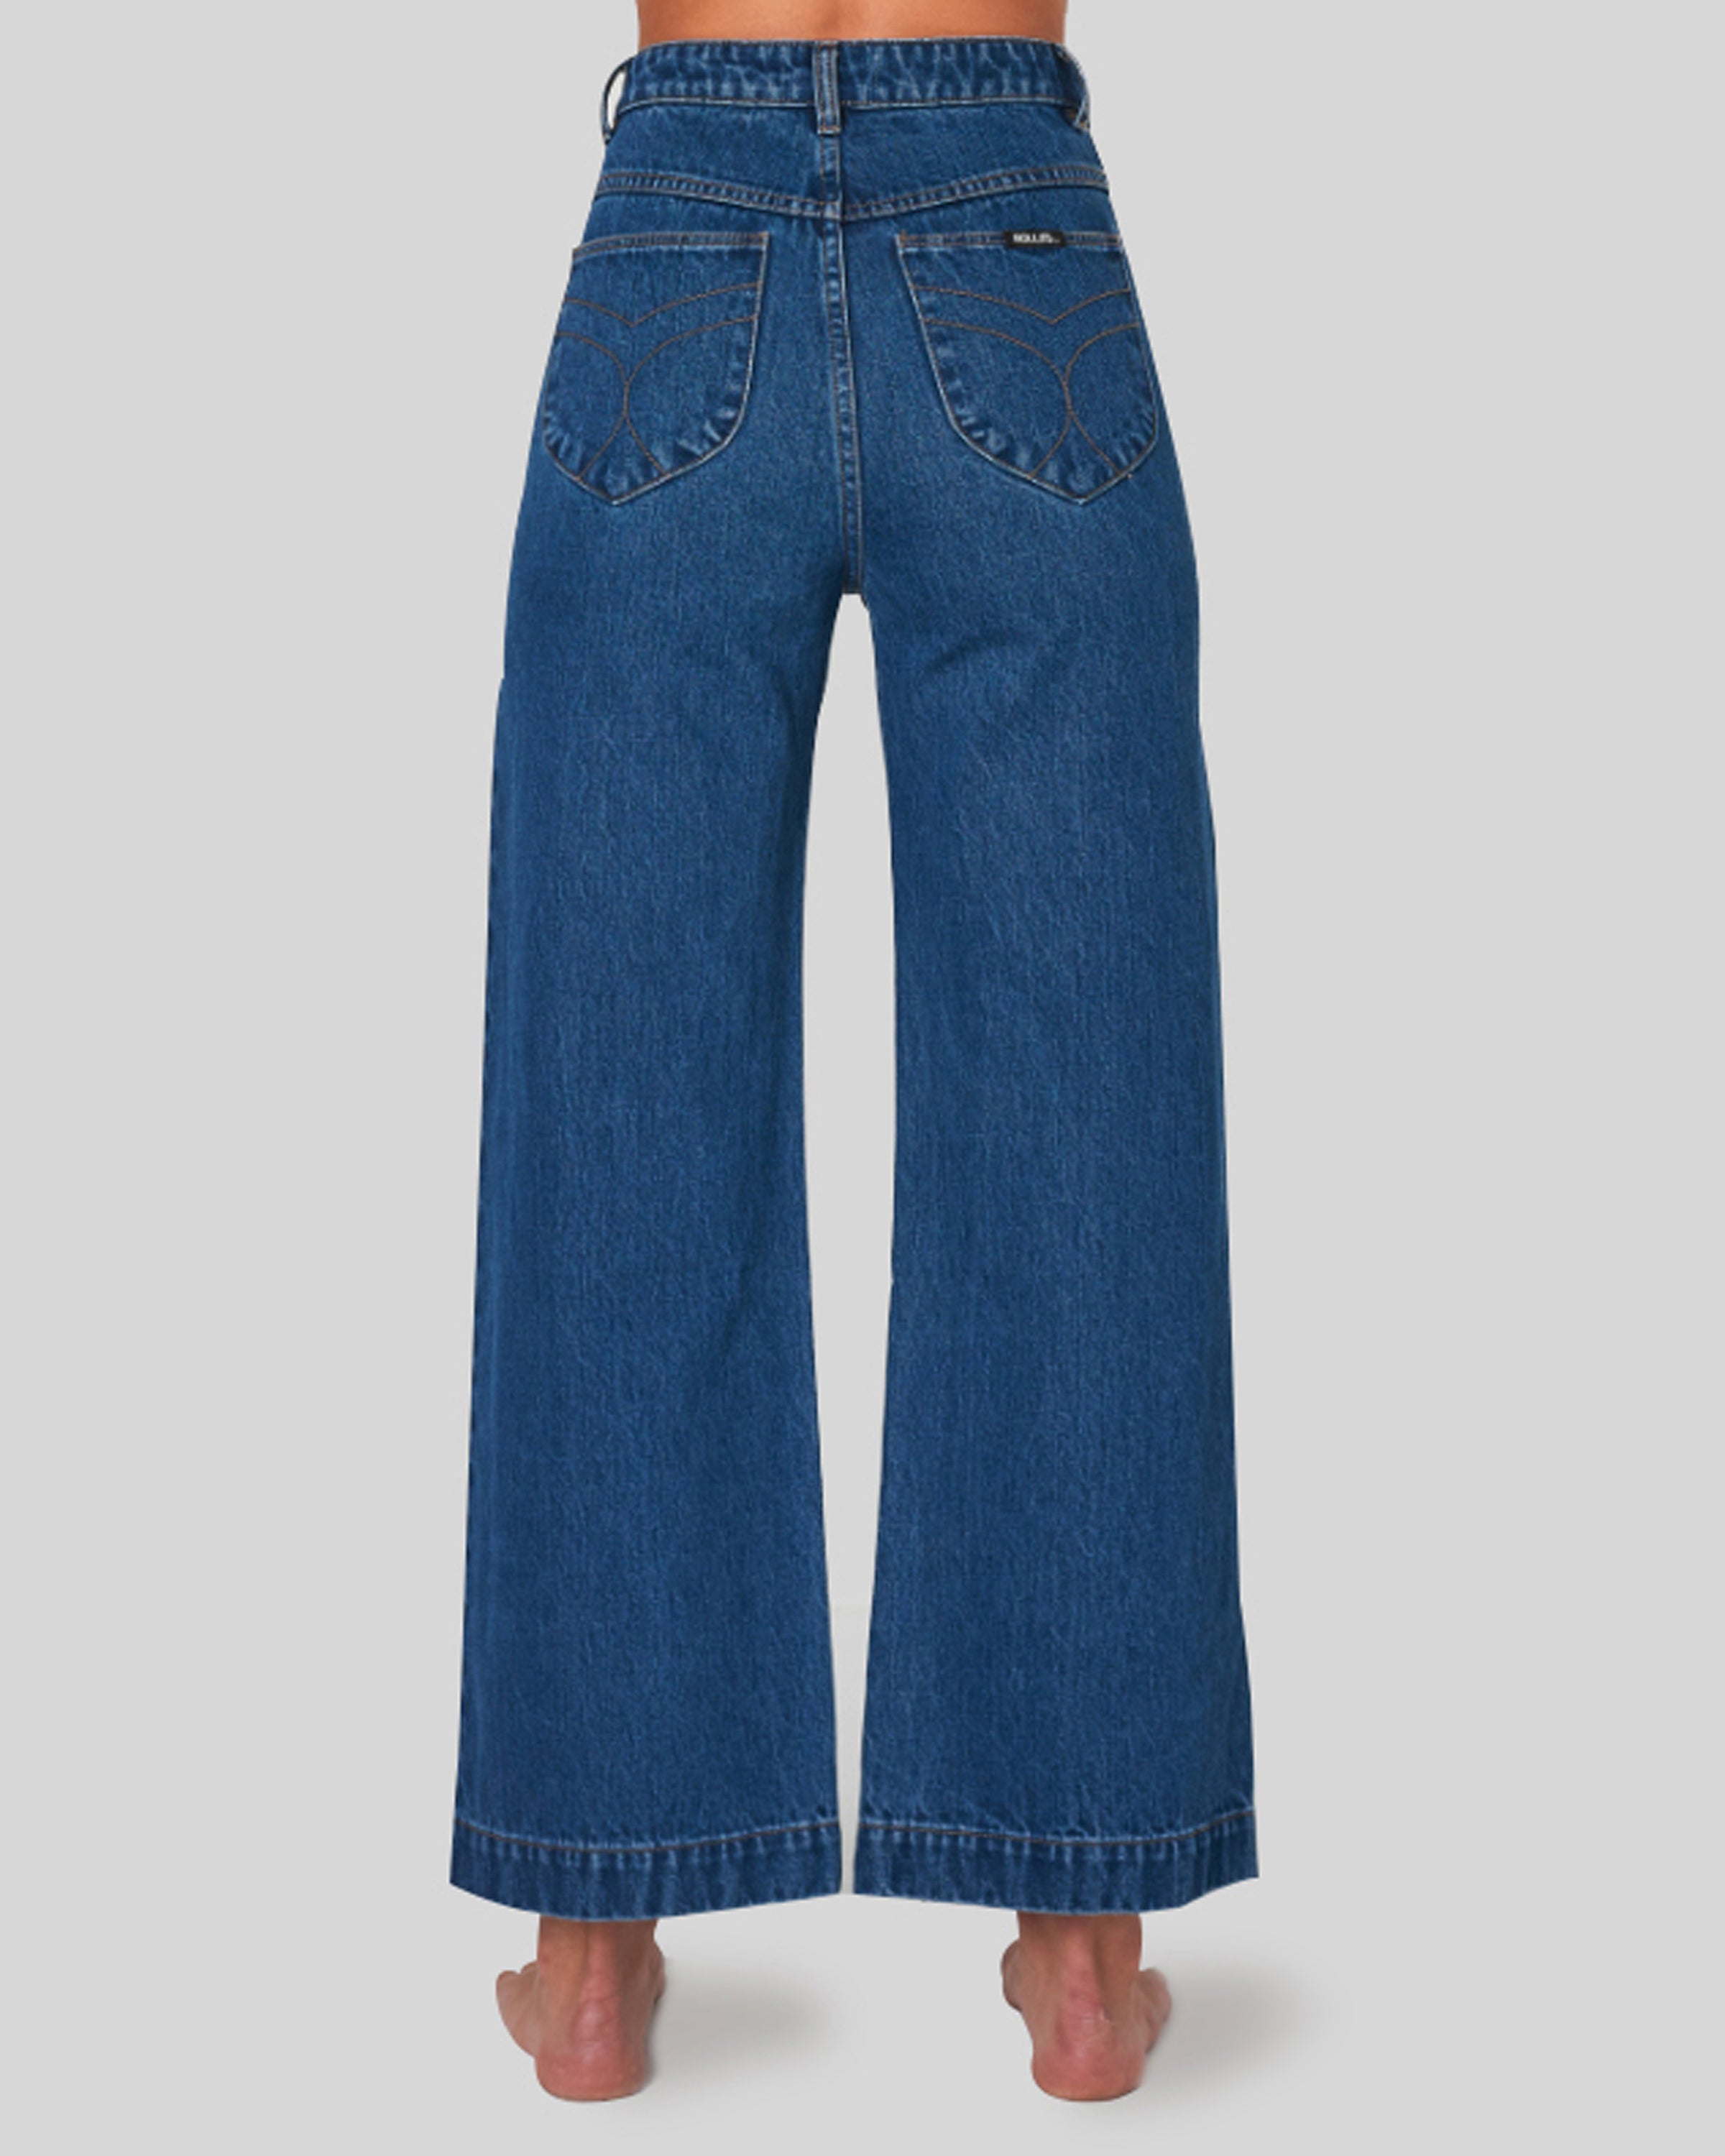 Rolla's Sailor Jean - Ashley Blue Jeans- Available Today with Free  Shipping!*